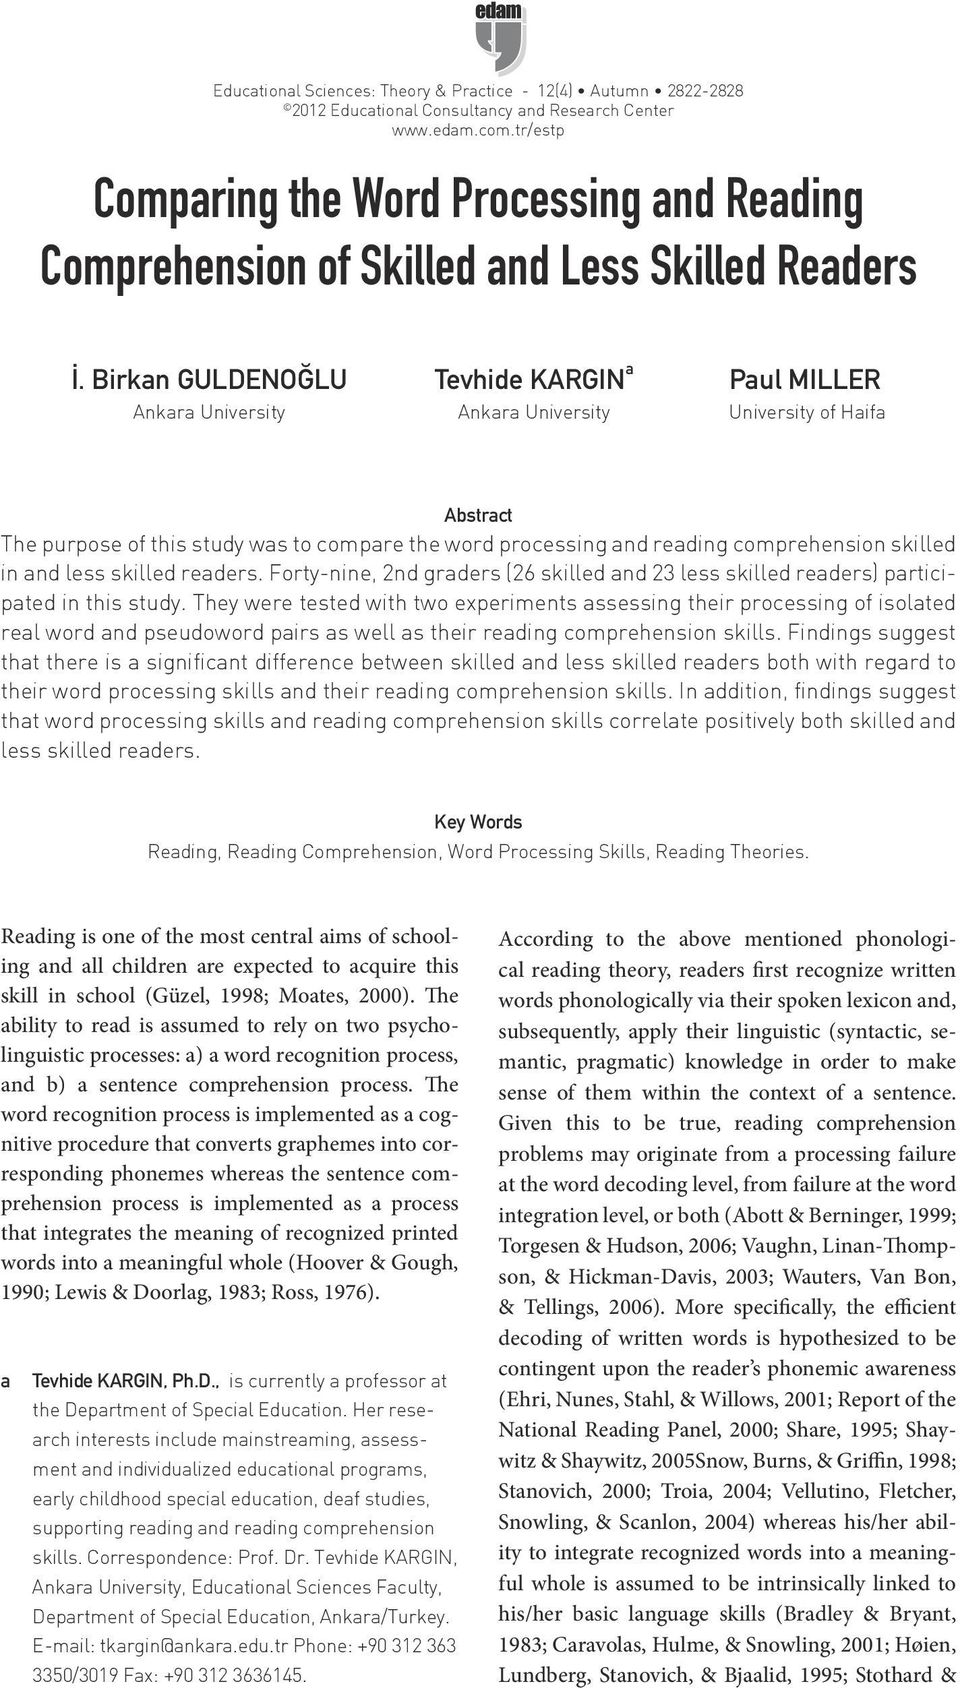 Birkan GULDENOĞLU Ankara University Tevhide KARGIN a Ankara University Paul MILLER University of Haifa Abstract The purpose of this study was to compare the word processing and reading comprehension